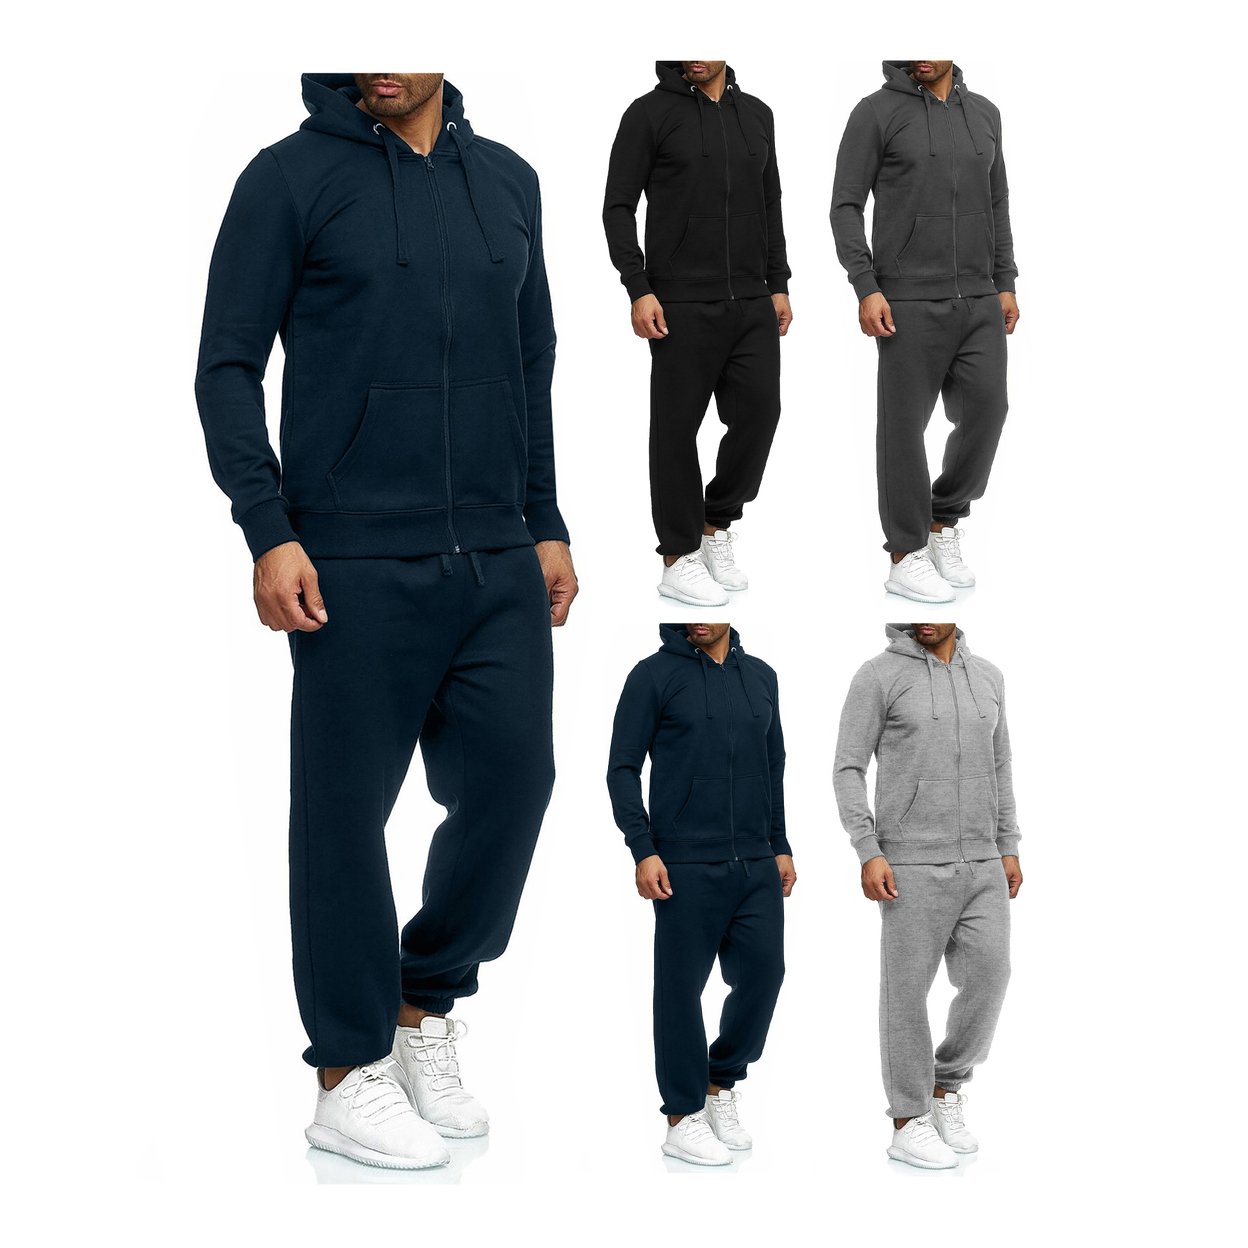 Men's Casual Big & Tall Athletic Active Winter Warm Fleece Lined Full Zip Tracksuit Jogger Set - Navy, Large